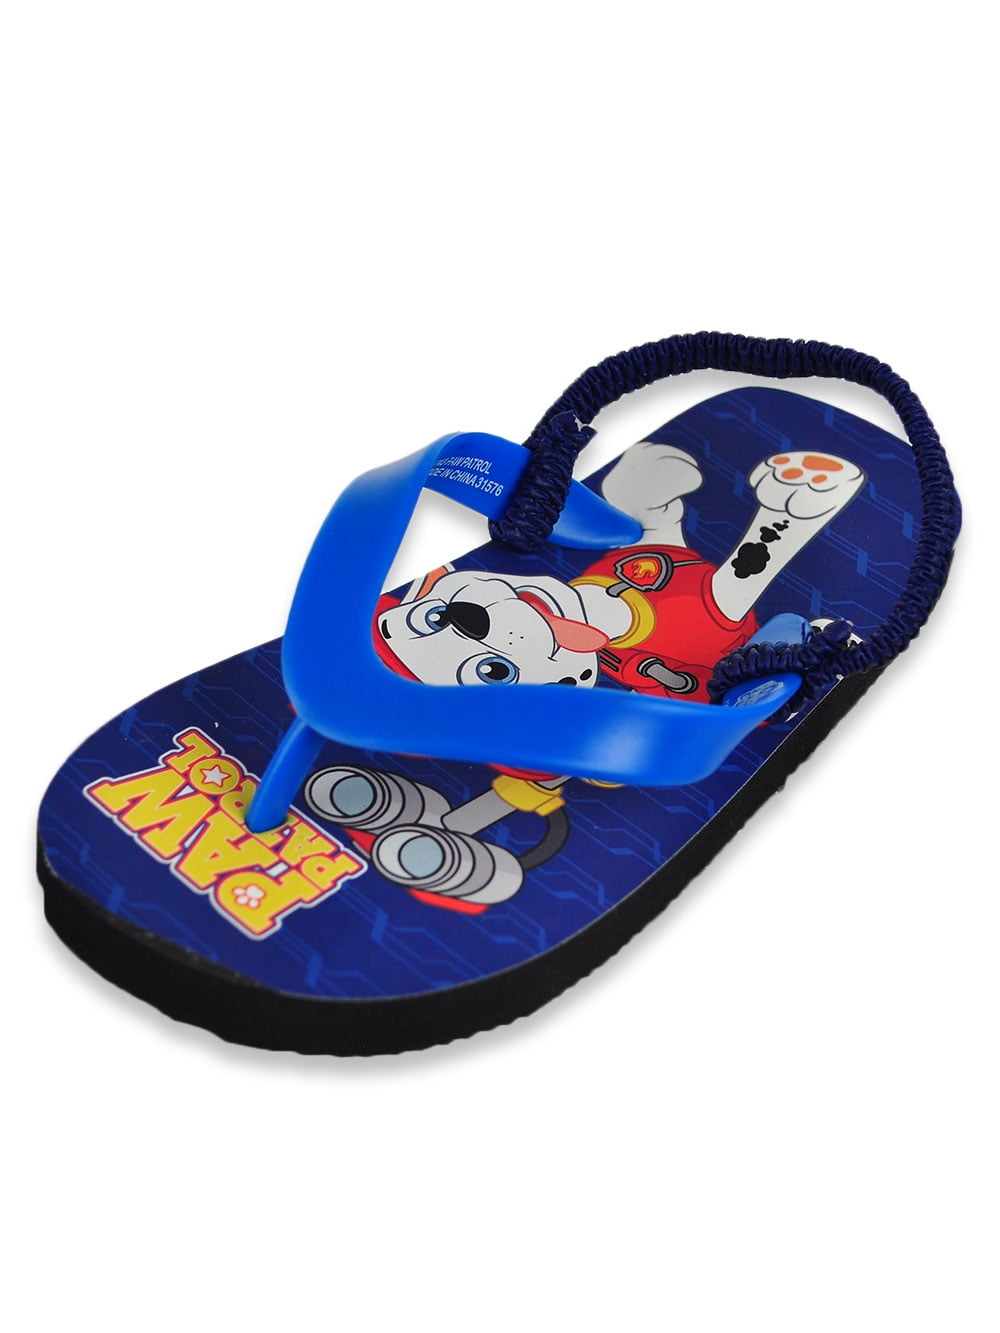 BOYS DISNEY FLIP FLOPS PLANES,JAKE,OR CARS MULTIPLE SIZES NEW WITH TAGS 